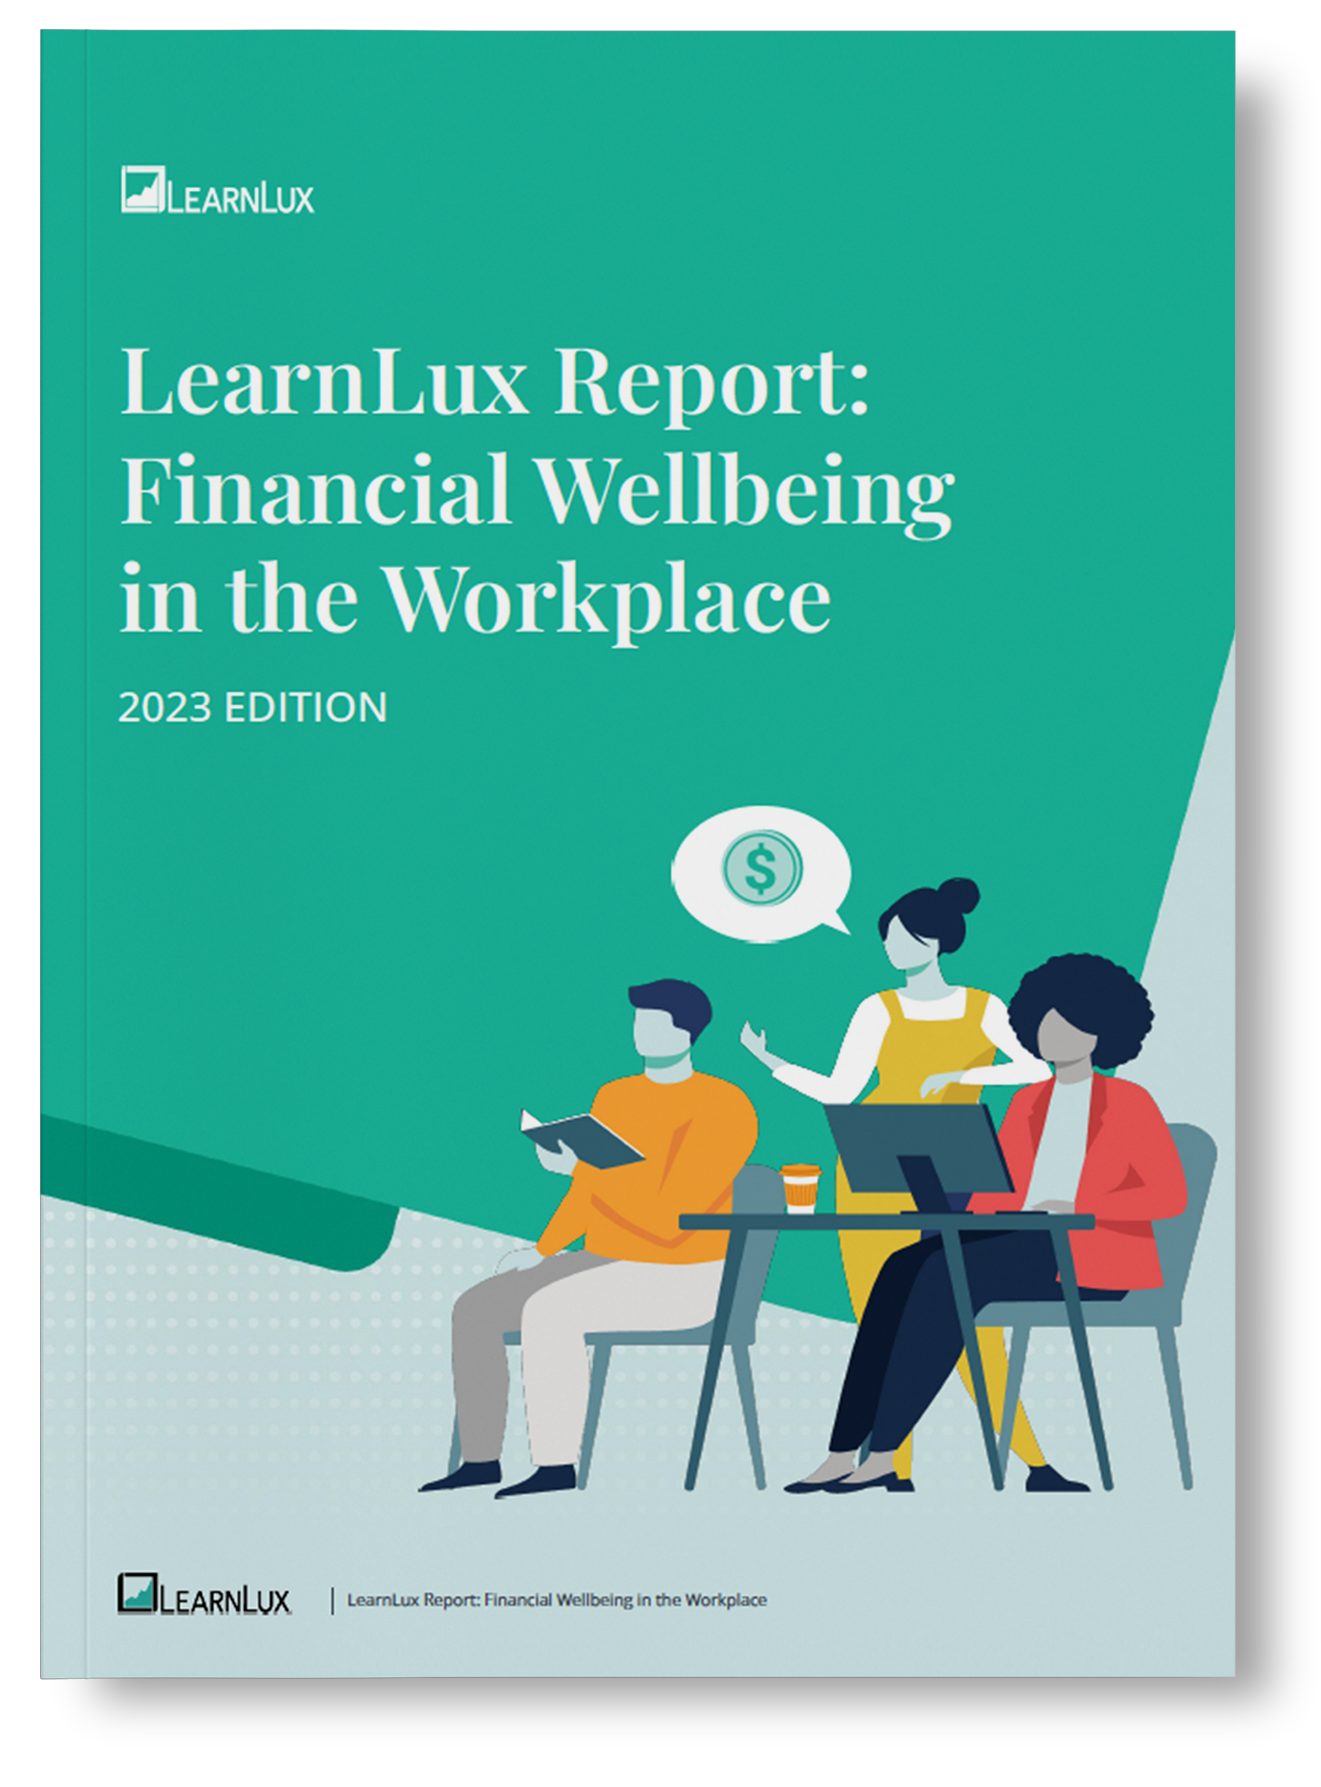 Financial wellbeing report for 2023